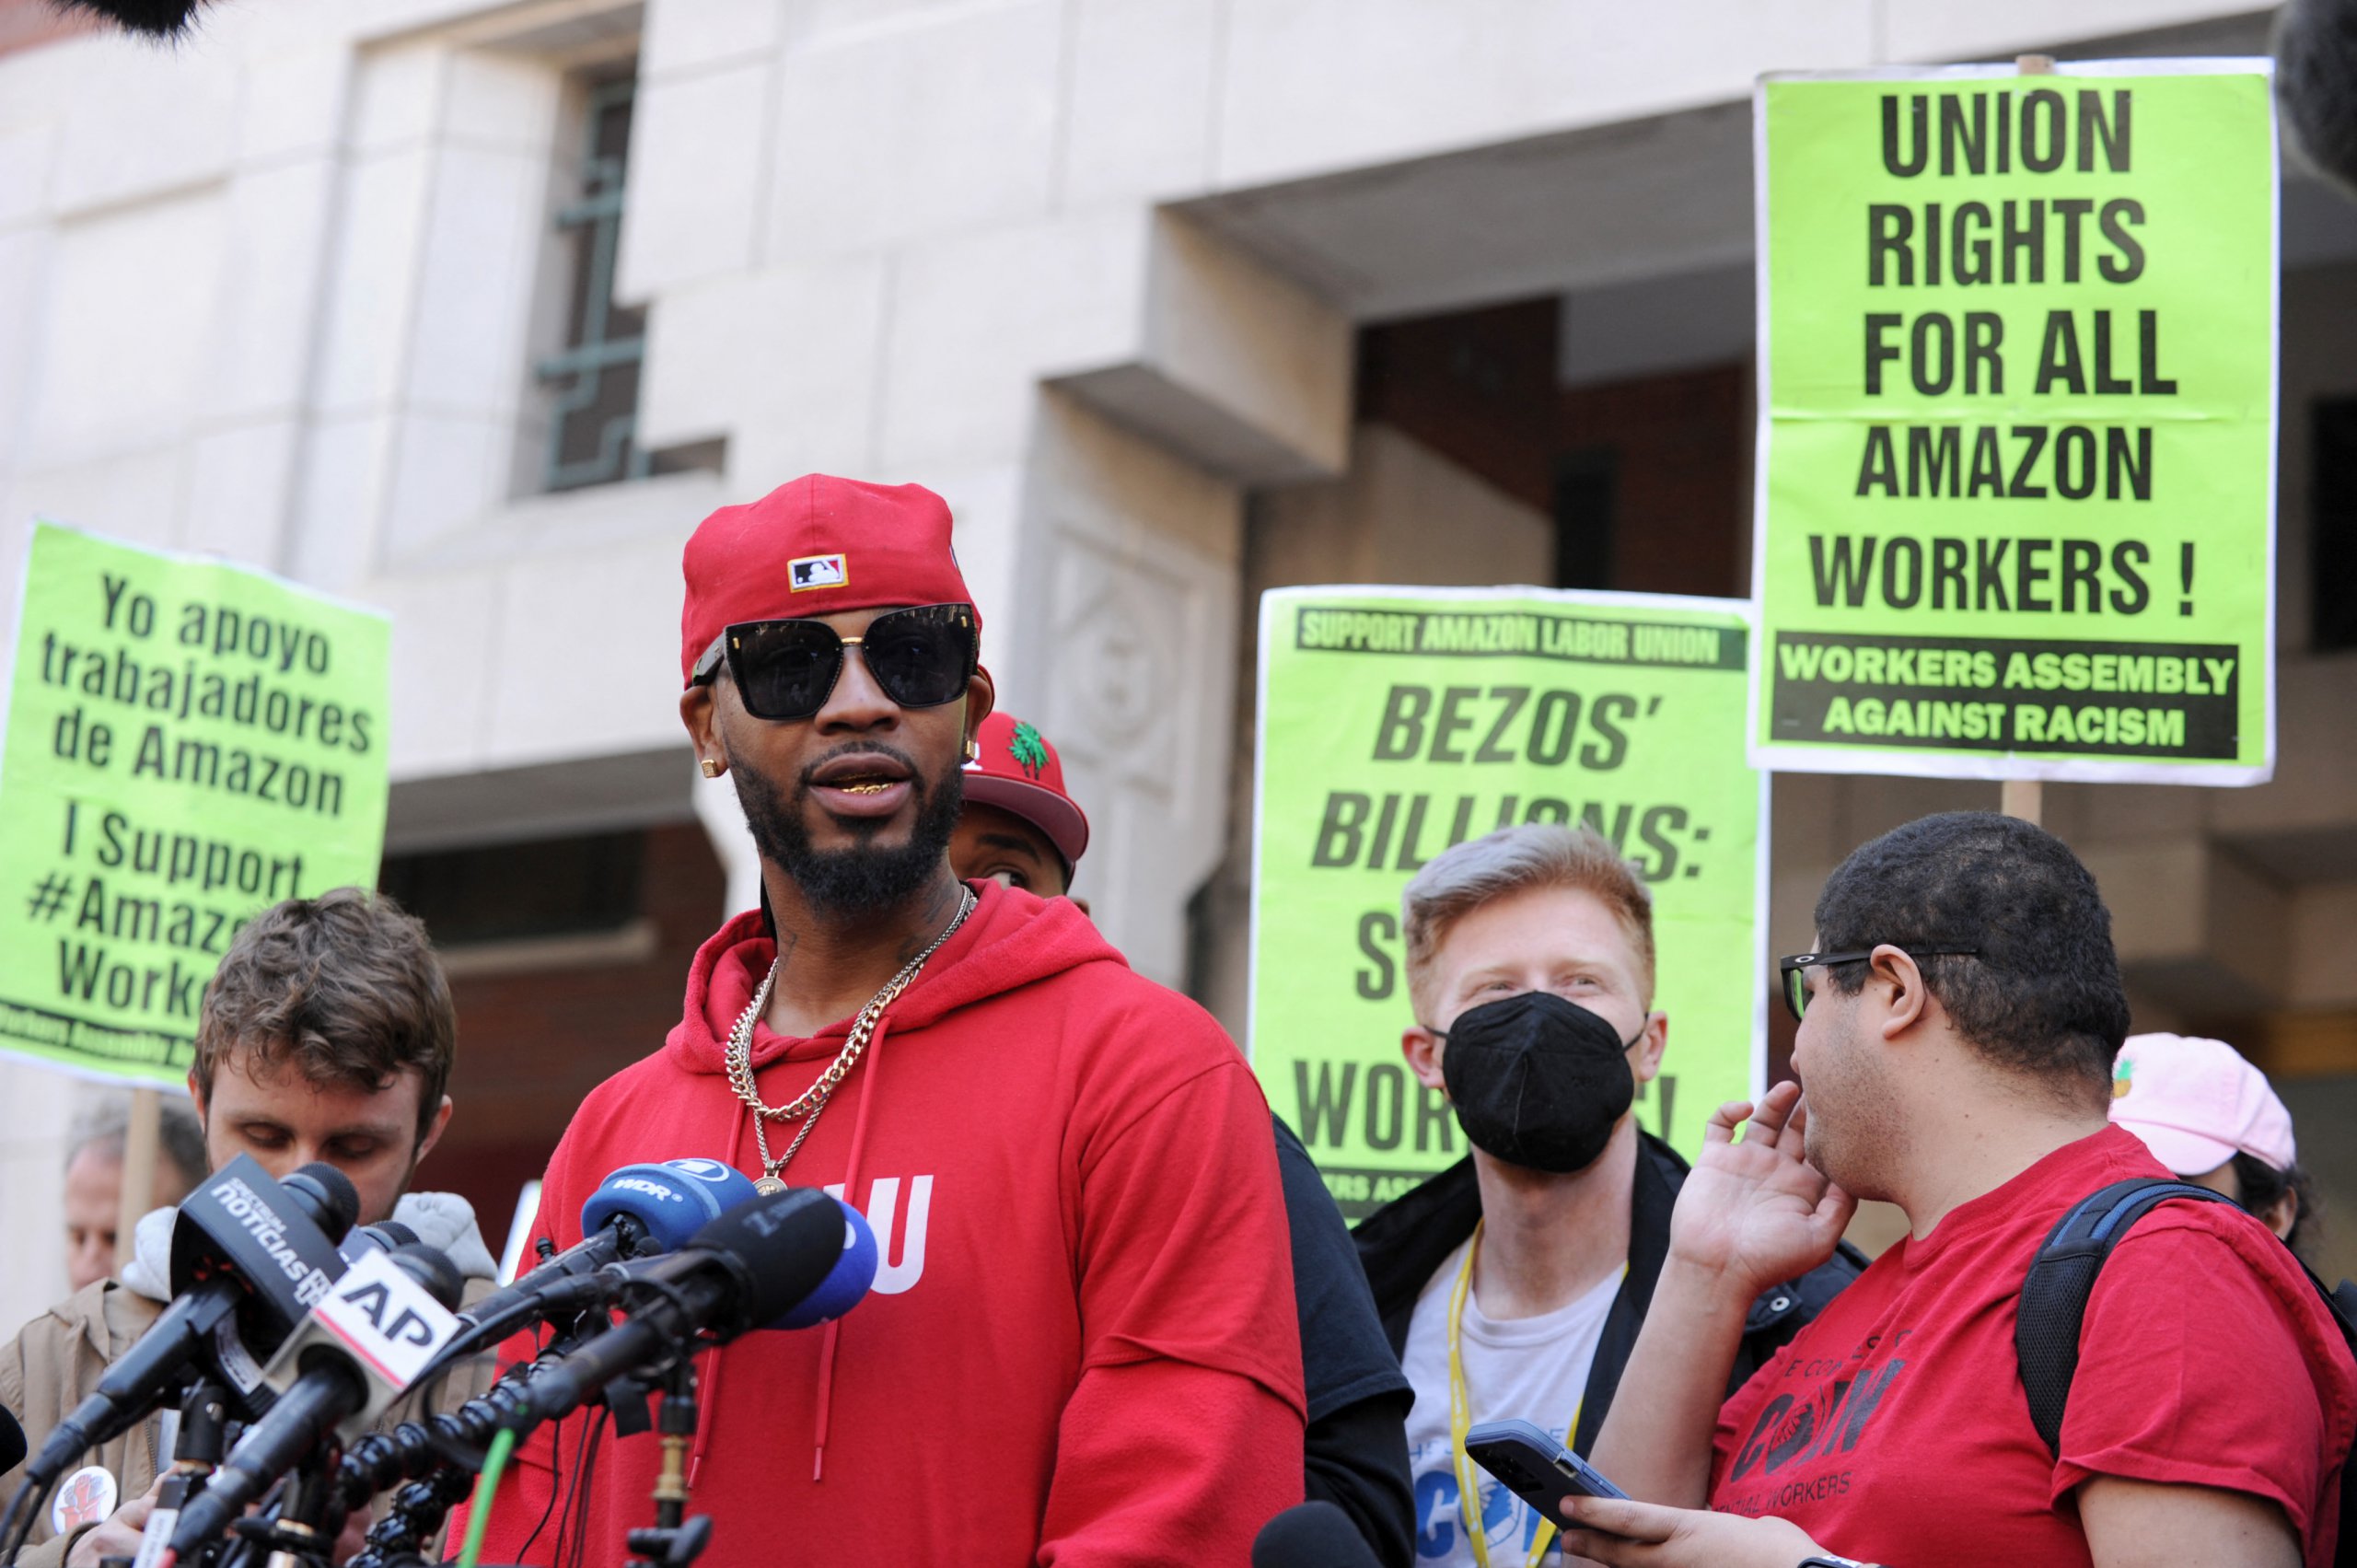 The union organizers' rep believes the New York union decision will start a chain reaction among Amazon warehouses